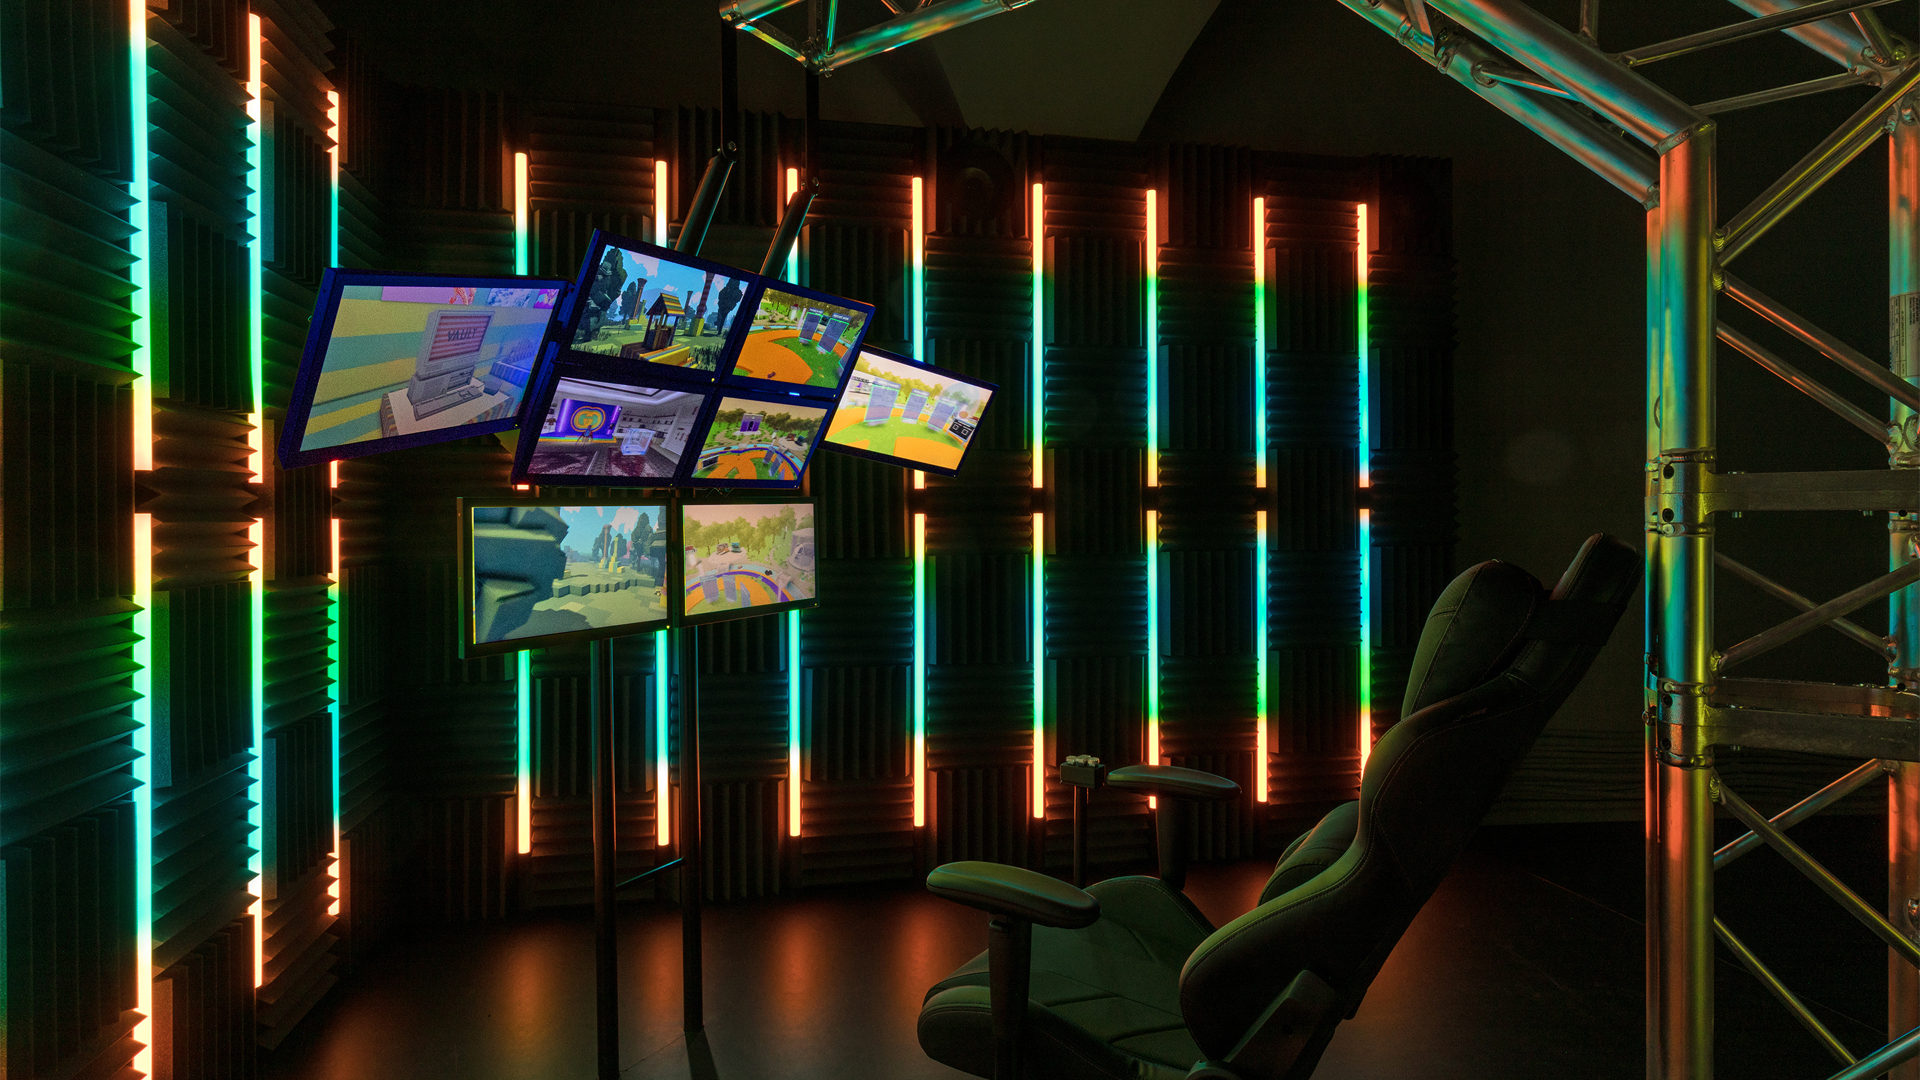 Installation of monitors and screens, colorful led tube installation